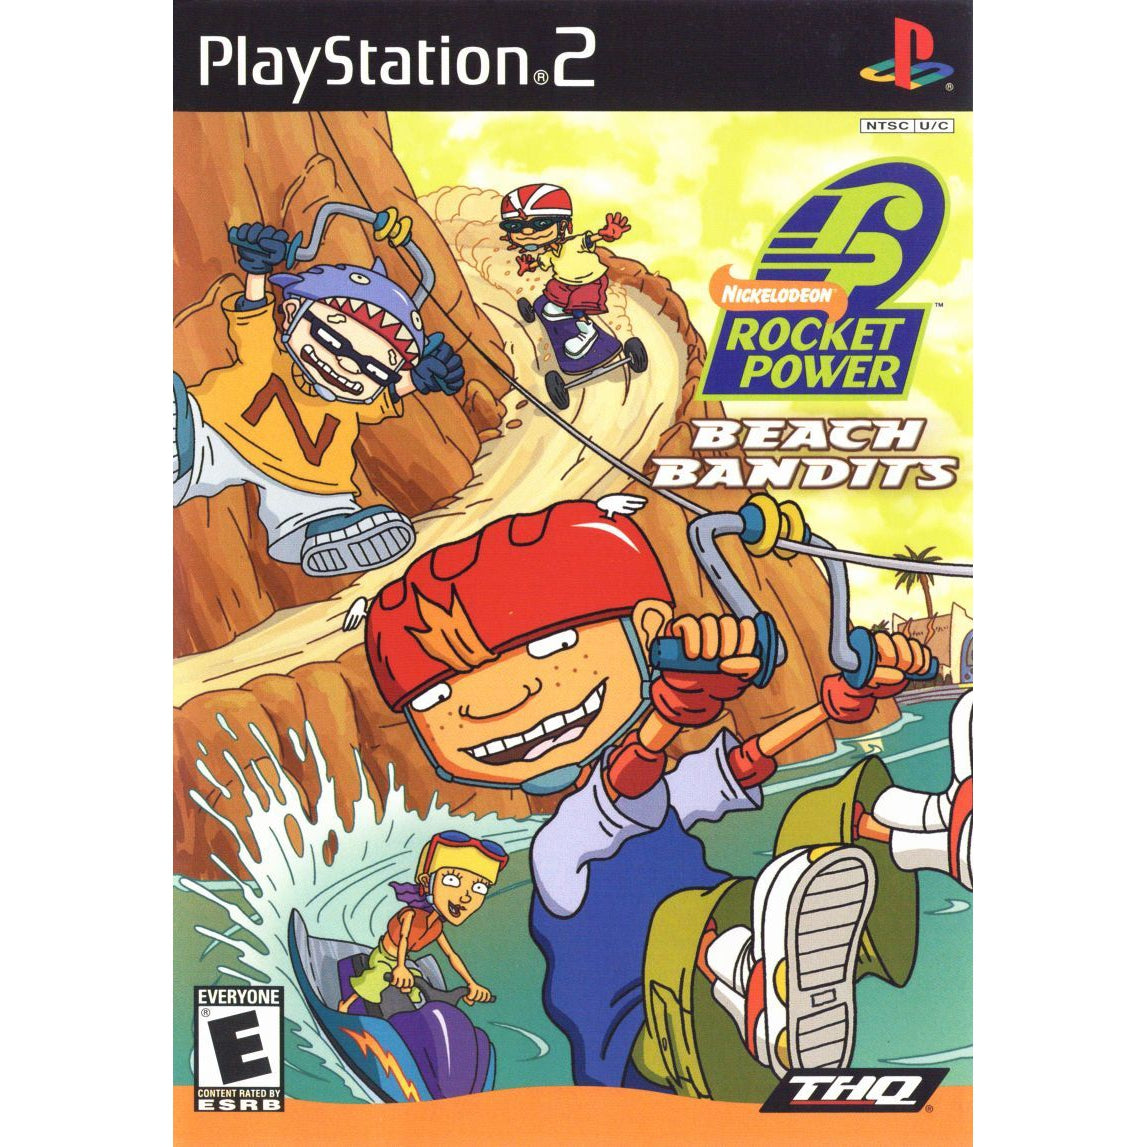 Nickelodeon: Rocket Power - Beach Bandits - PlayStation 2 (PS2) Game Complete - YourGamingShop.com - Buy, Sell, Trade Video Games Online. 120 Day Warranty. Satisfaction Guaranteed.